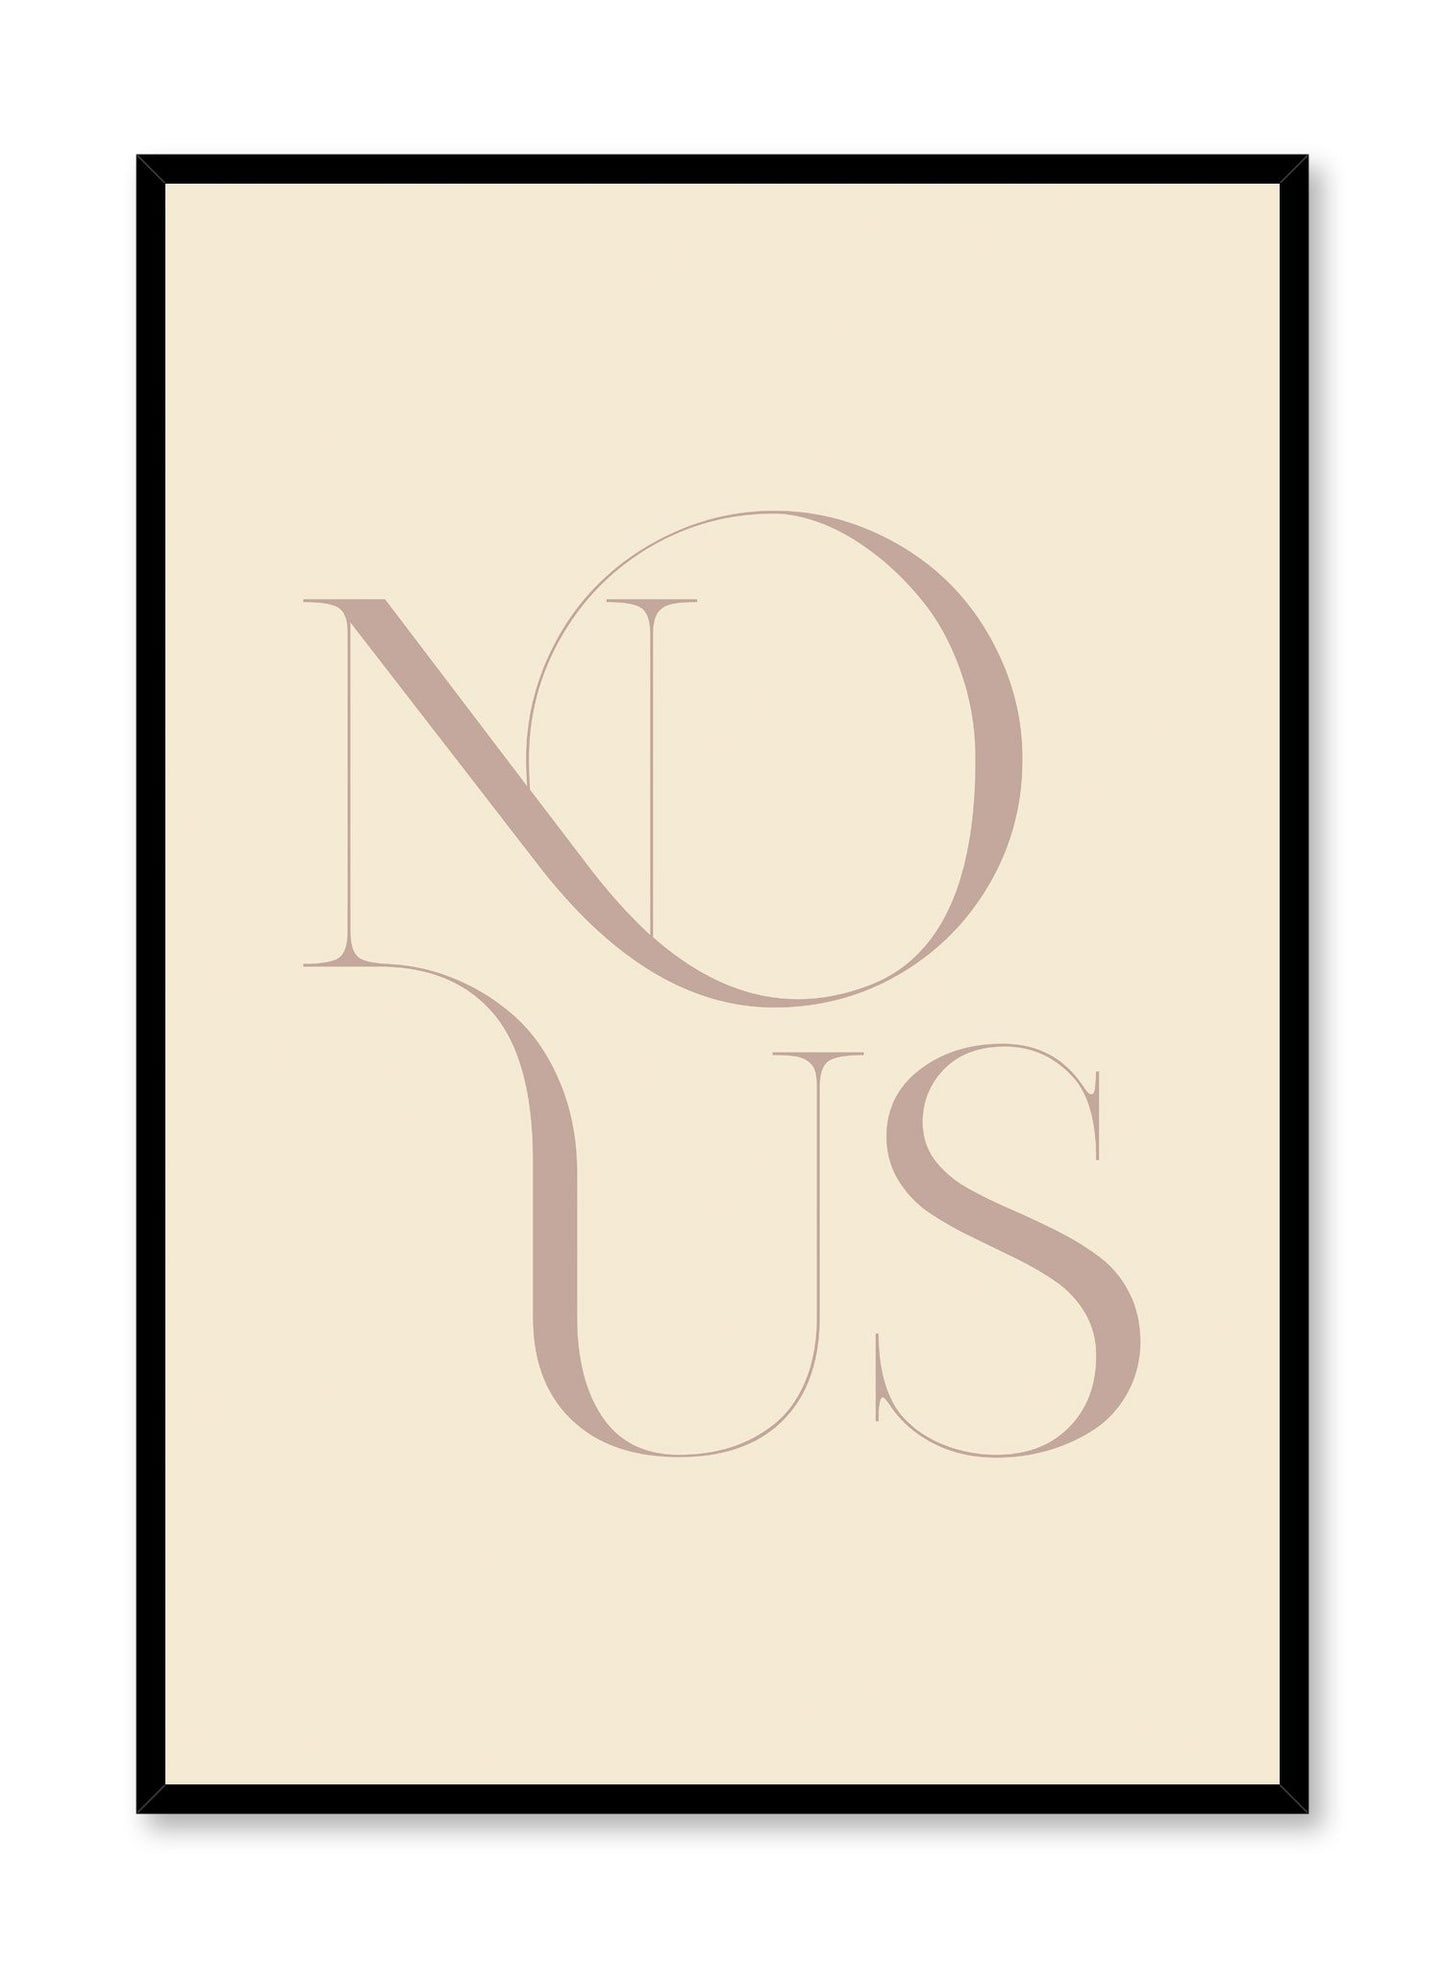 "Us in French" is a minimalist typography poster by Opposite Wall of the word “us” in French in vintage lettering over a light beige background.